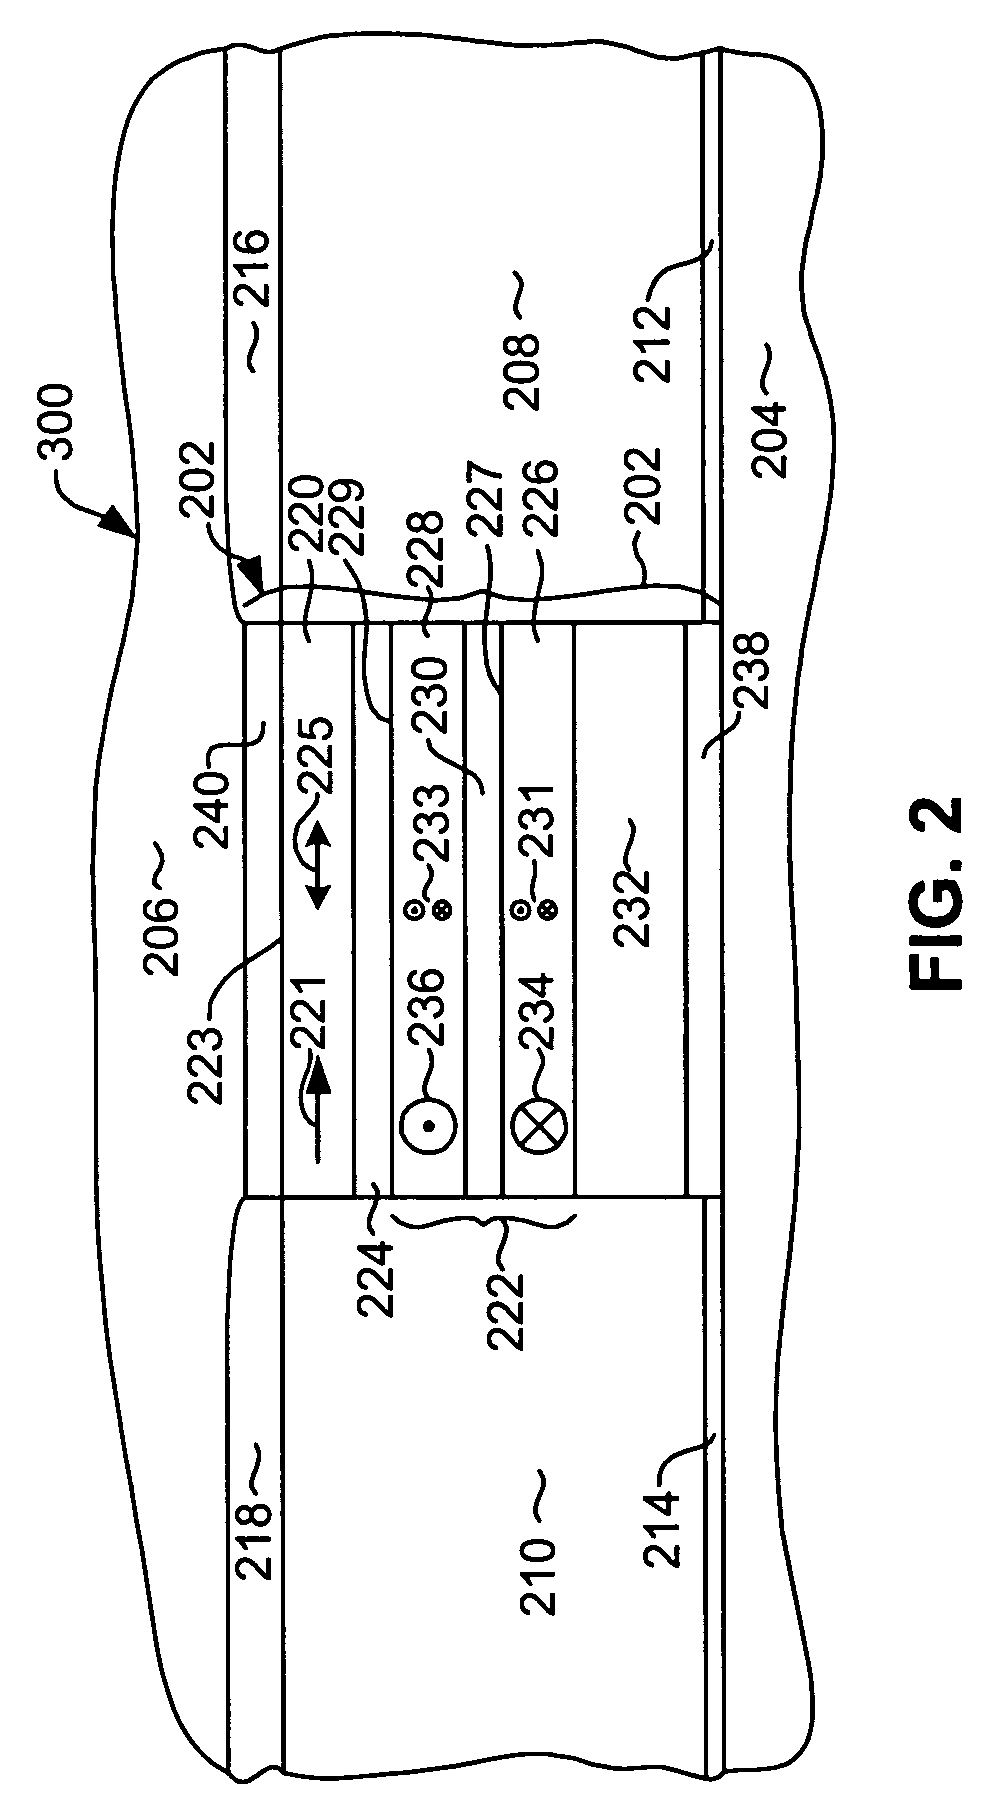 Magnetoresistive sensor having magnetic layers with tailored magnetic anisotropy induced by direct ion milling